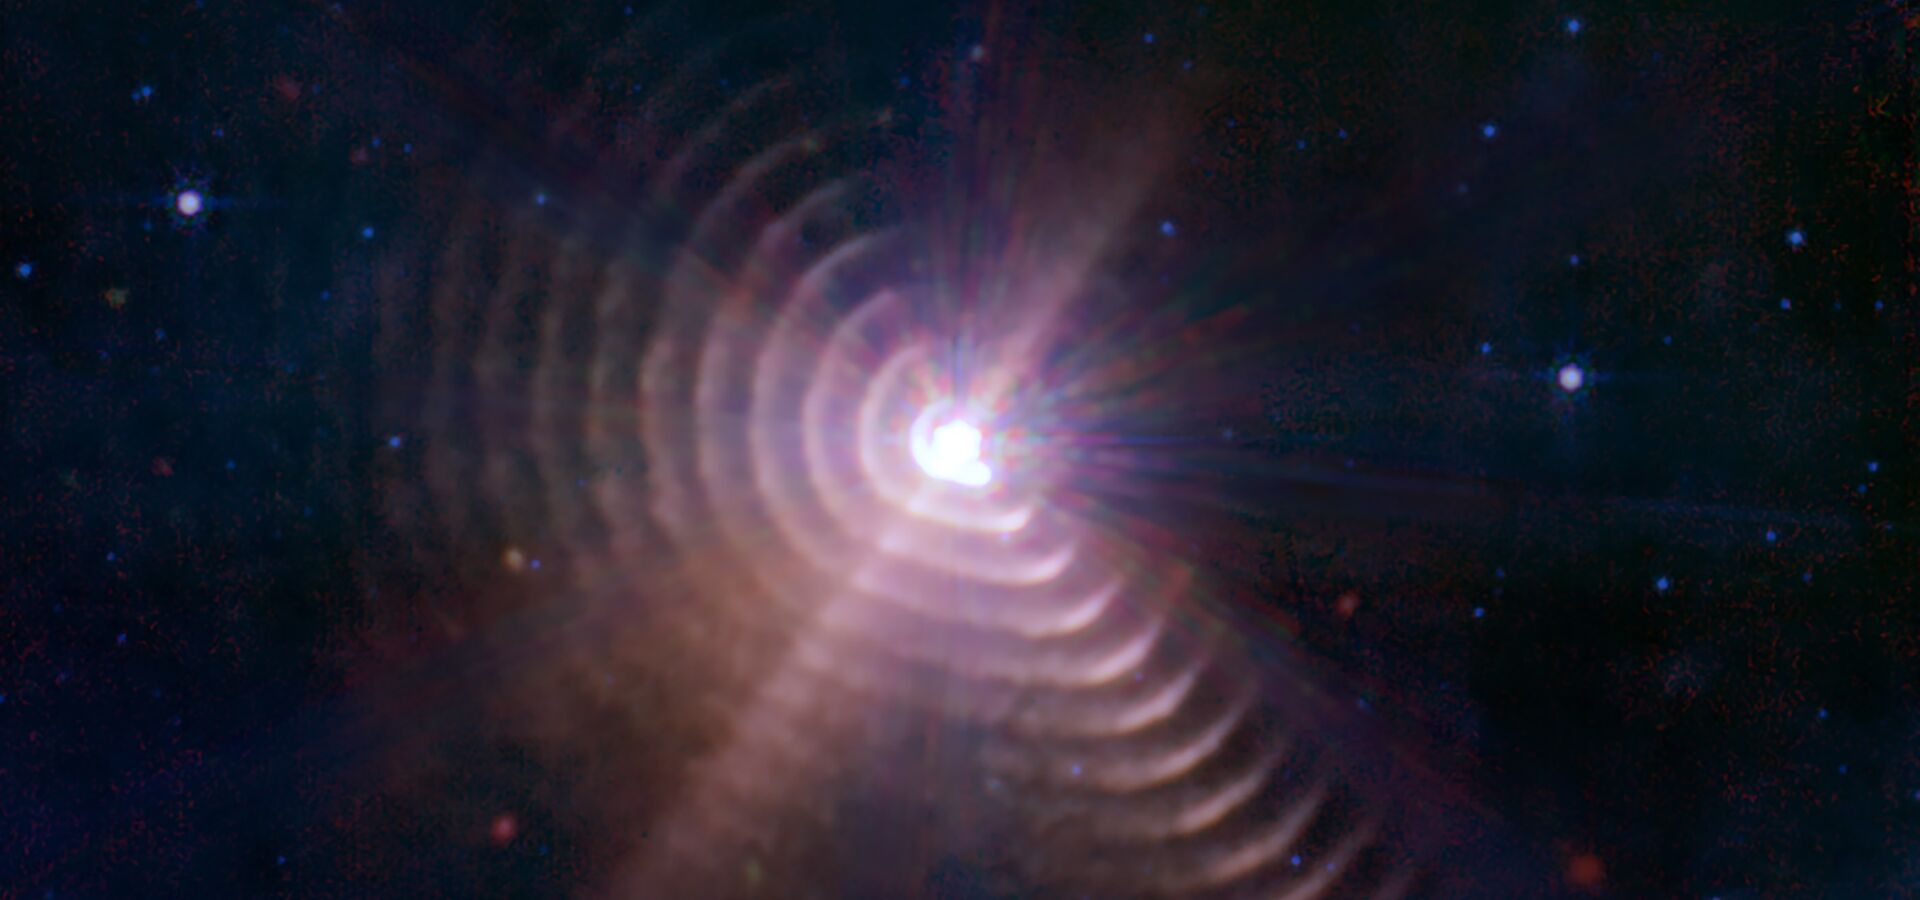 Rings around a rosy star system are destined for interstellar space